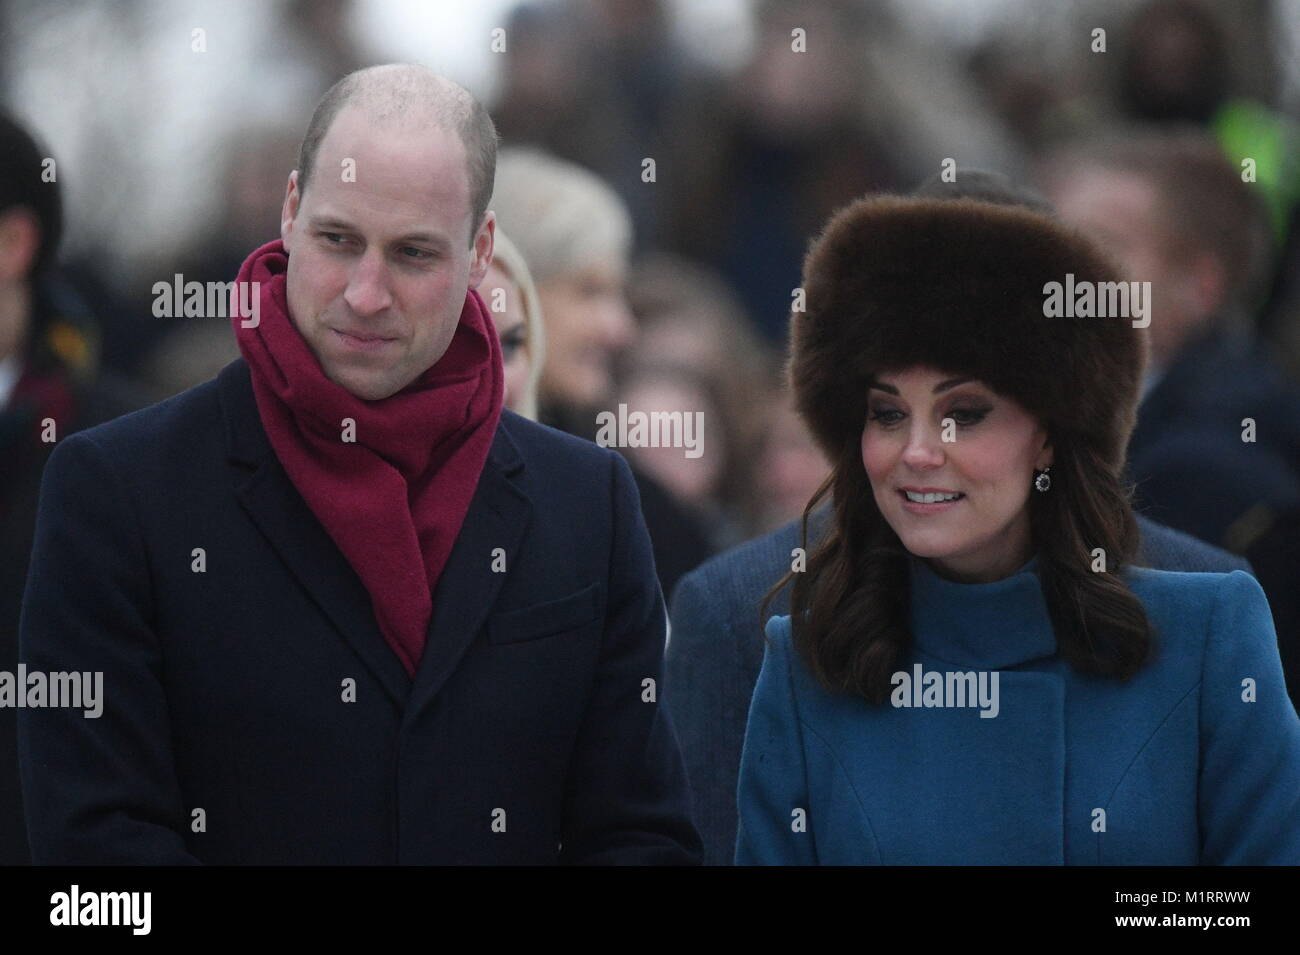 The Duke and Duchess of Cambridge during a visit to the Princess Ingrid Alexandra Sculpture Park within the Palace Gardens in Oslo, Norway, which opened last year in the name of Princess Ingrid Alexandra to mark the 25th anniversary of The King's reign. Stock Photo